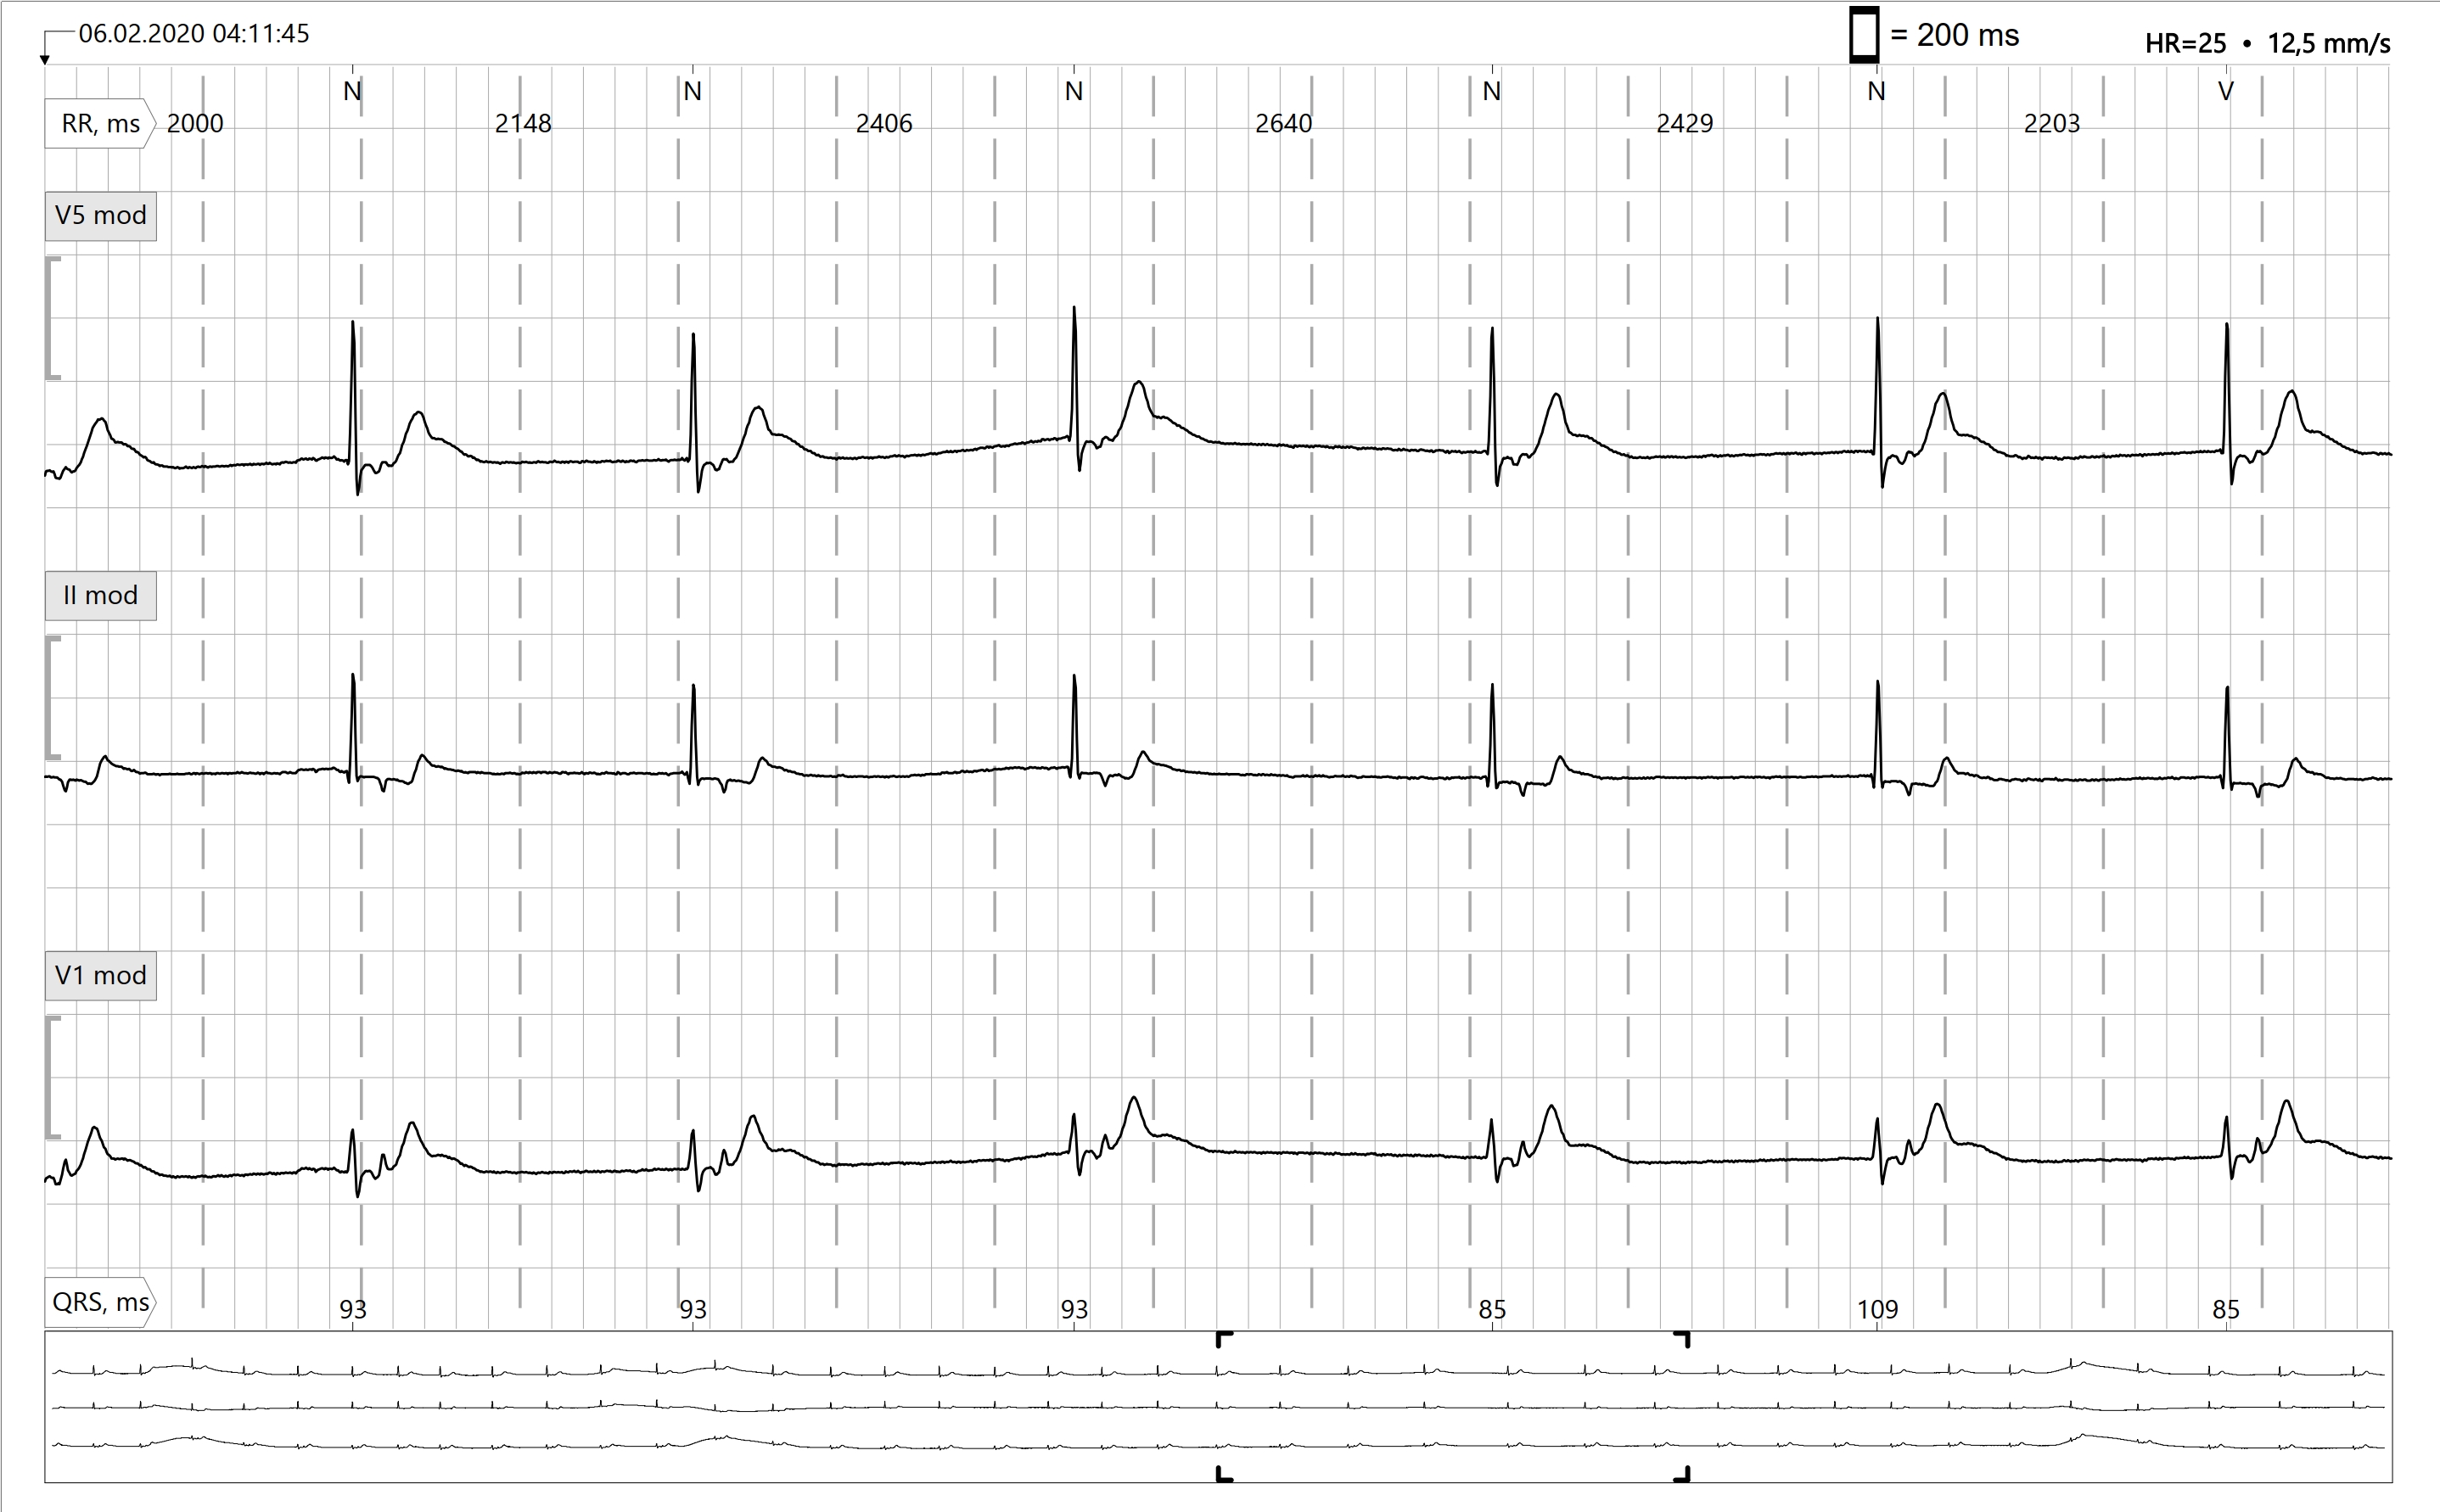 Accelerated junctional rhythm icd 10